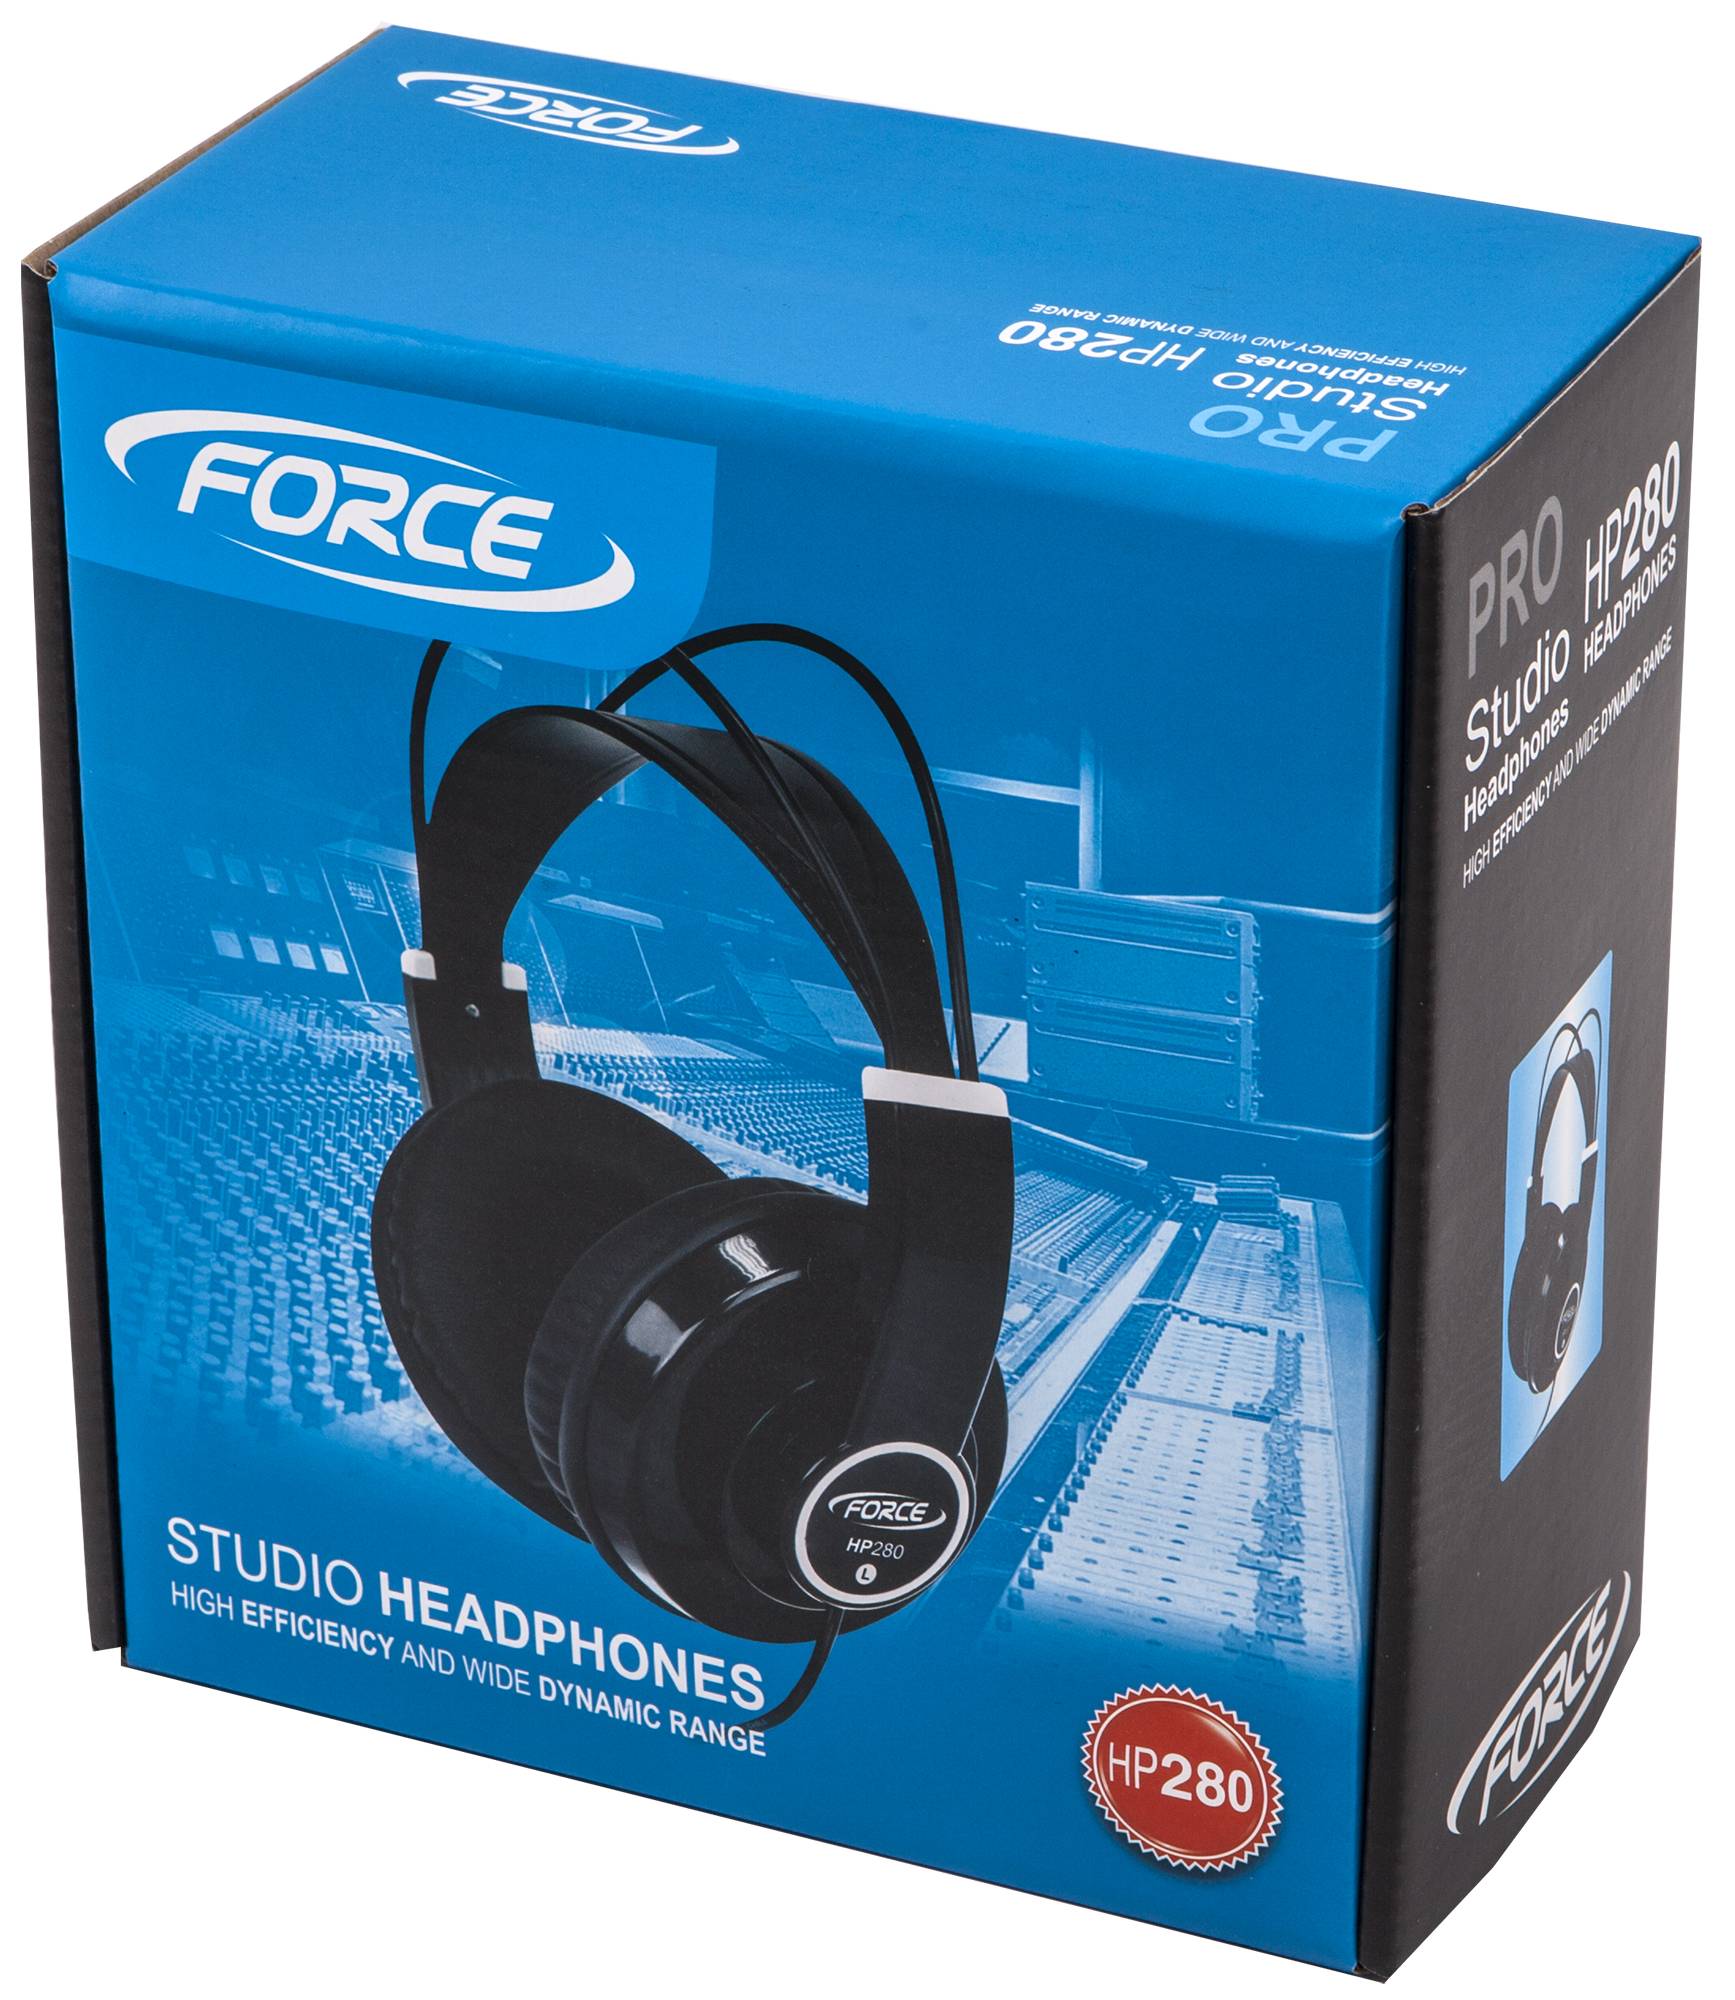   FORCE HP280